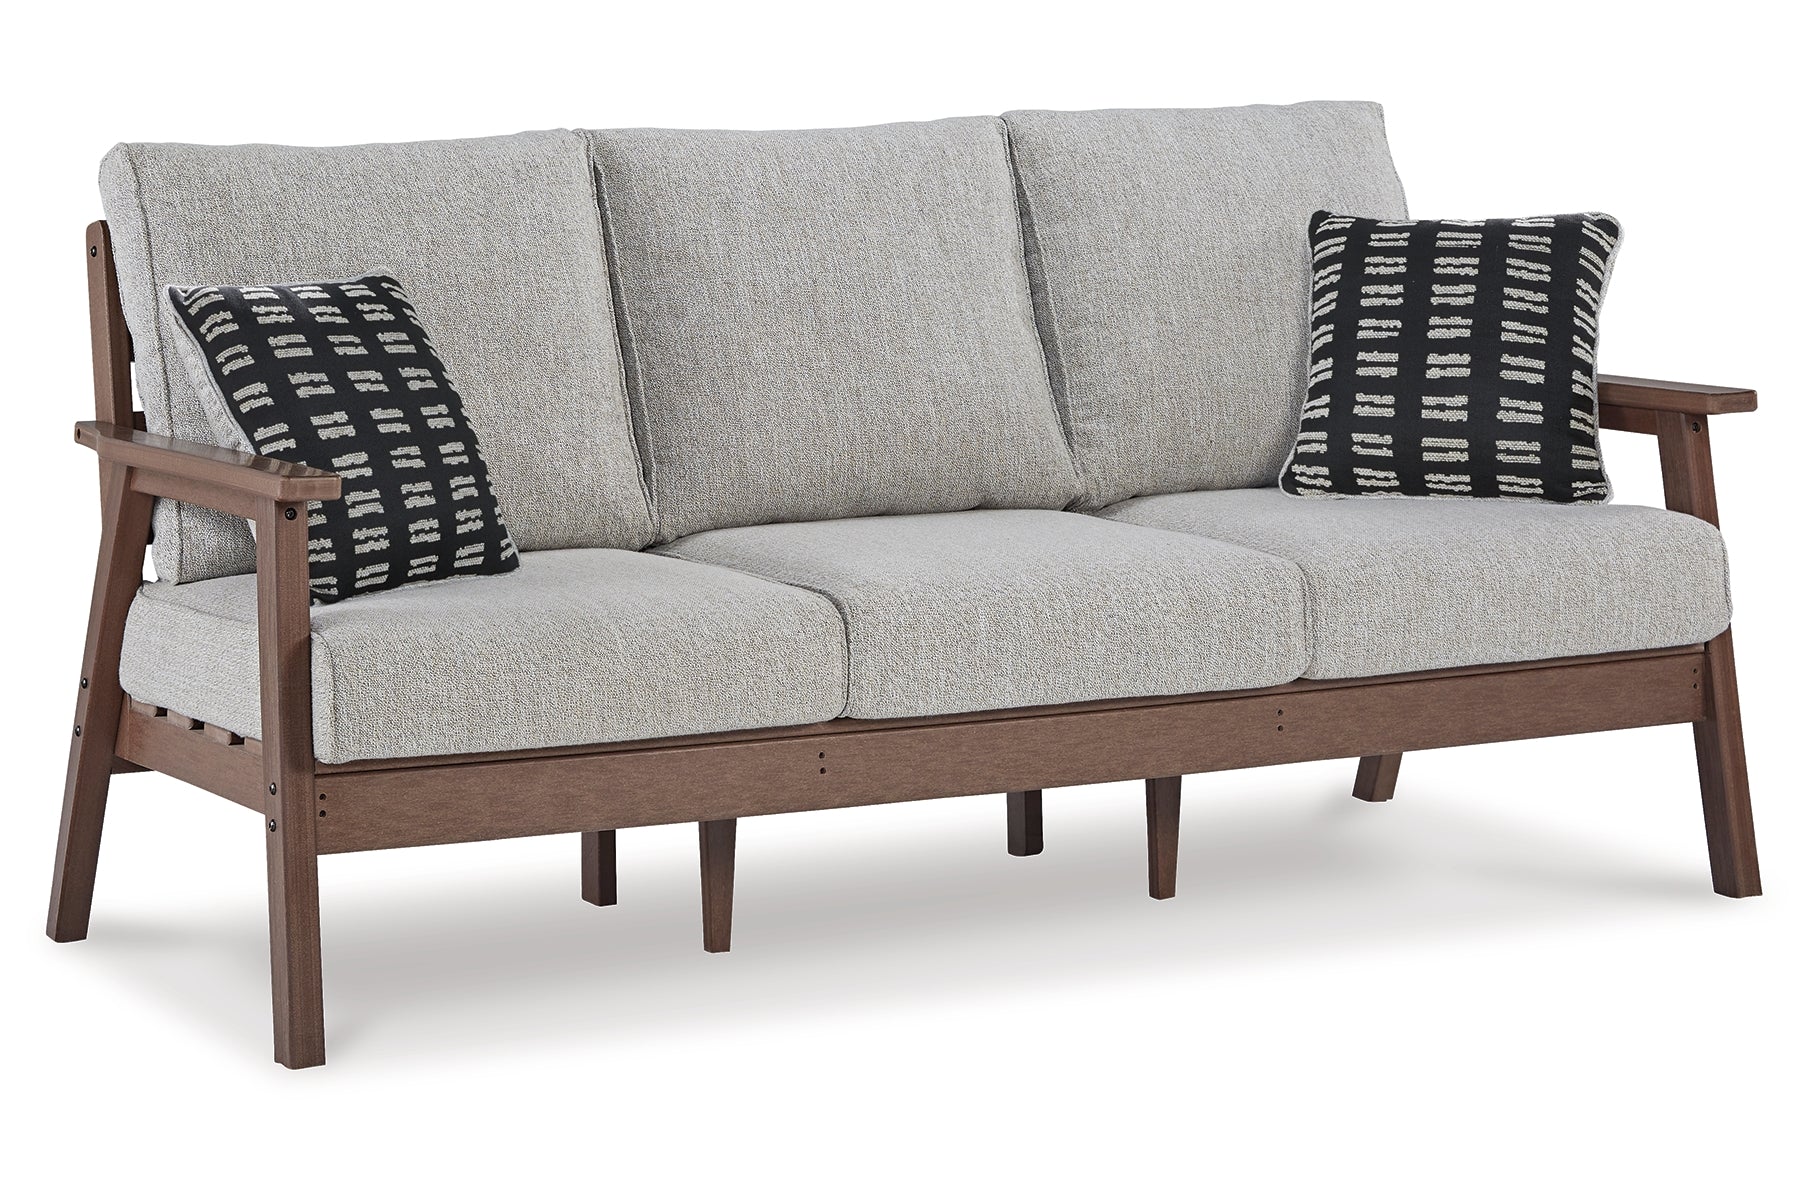 Emmeline Outdoor Sofa and Loveseat with Coffee Table and 2 End Tables